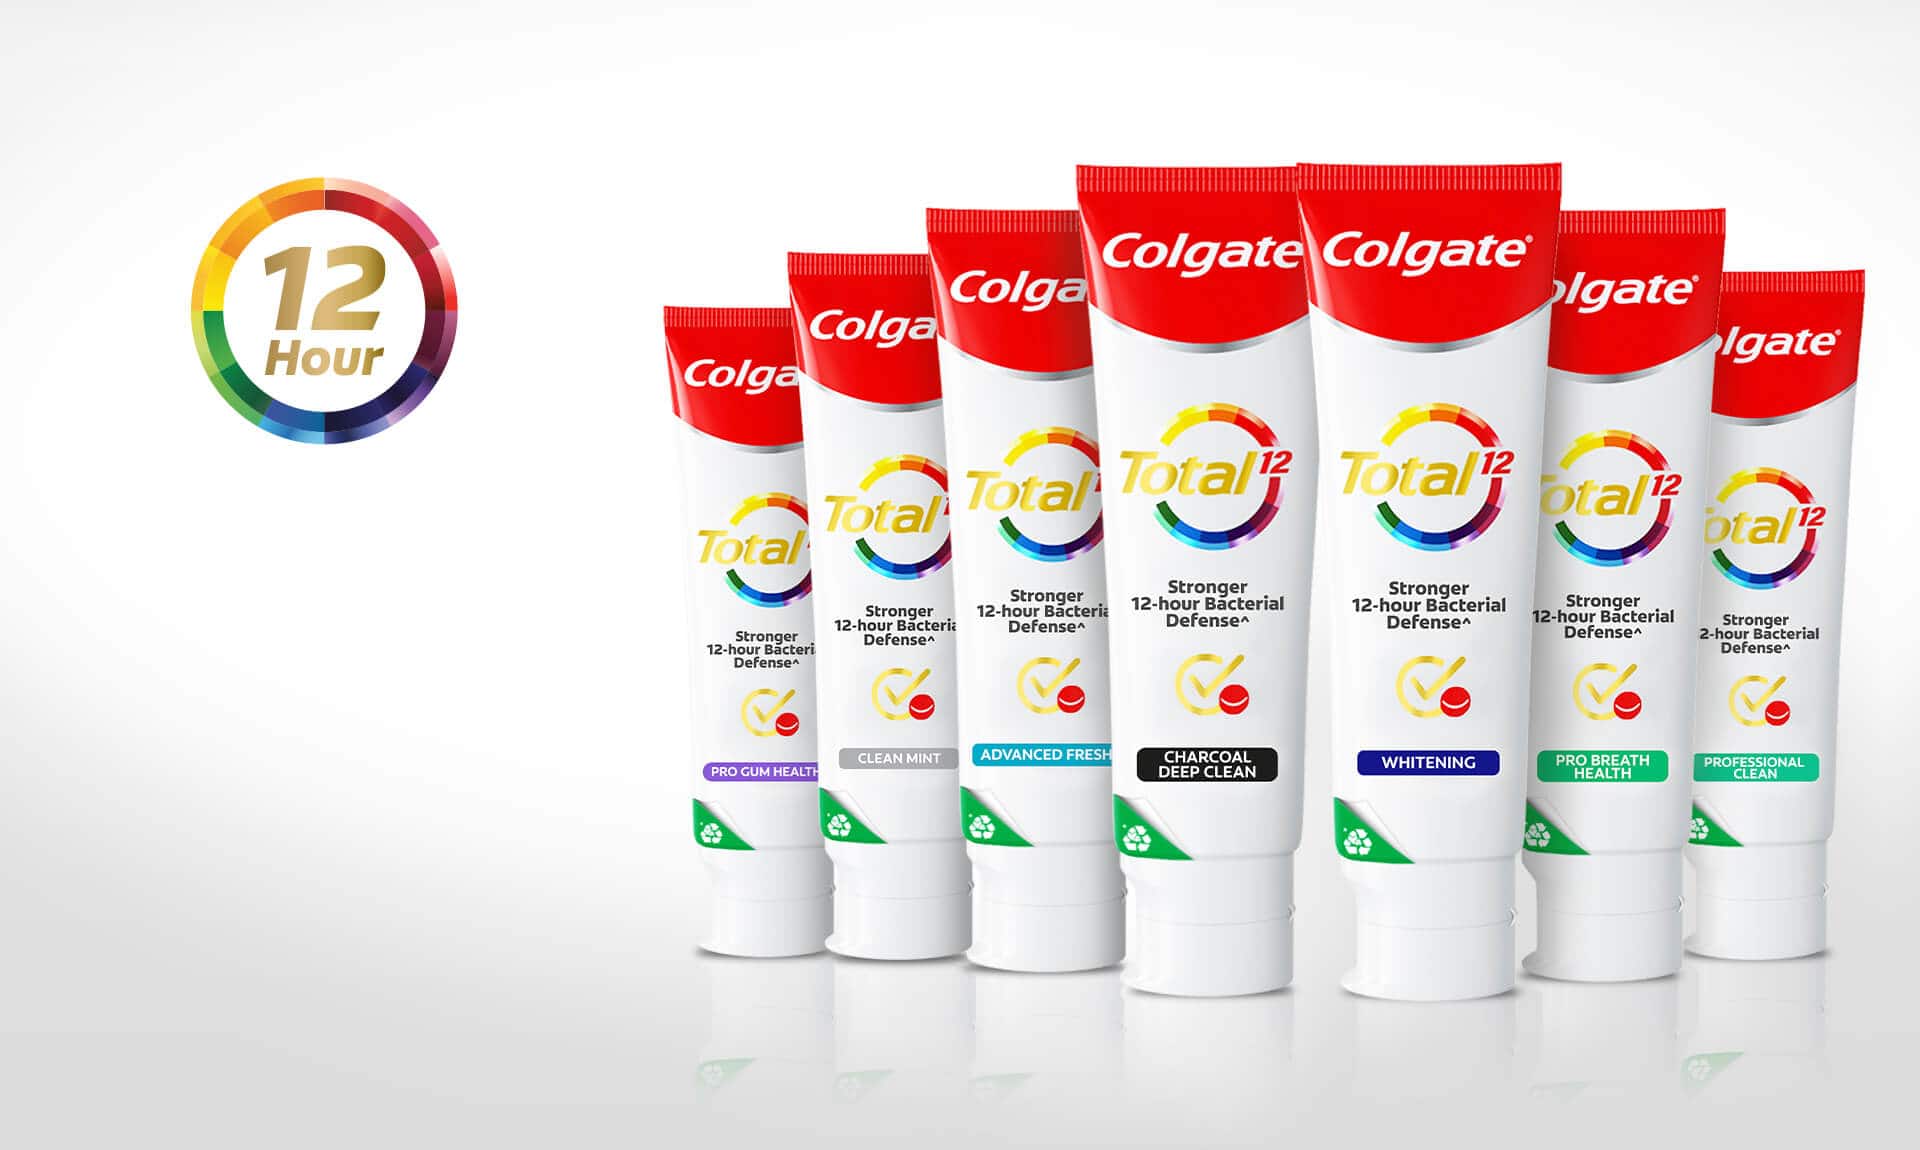 Colgate Total Plaque Release | Superior & Advanced Plaque Removal Technology | Release 3X more plaque and help fortifies gum 